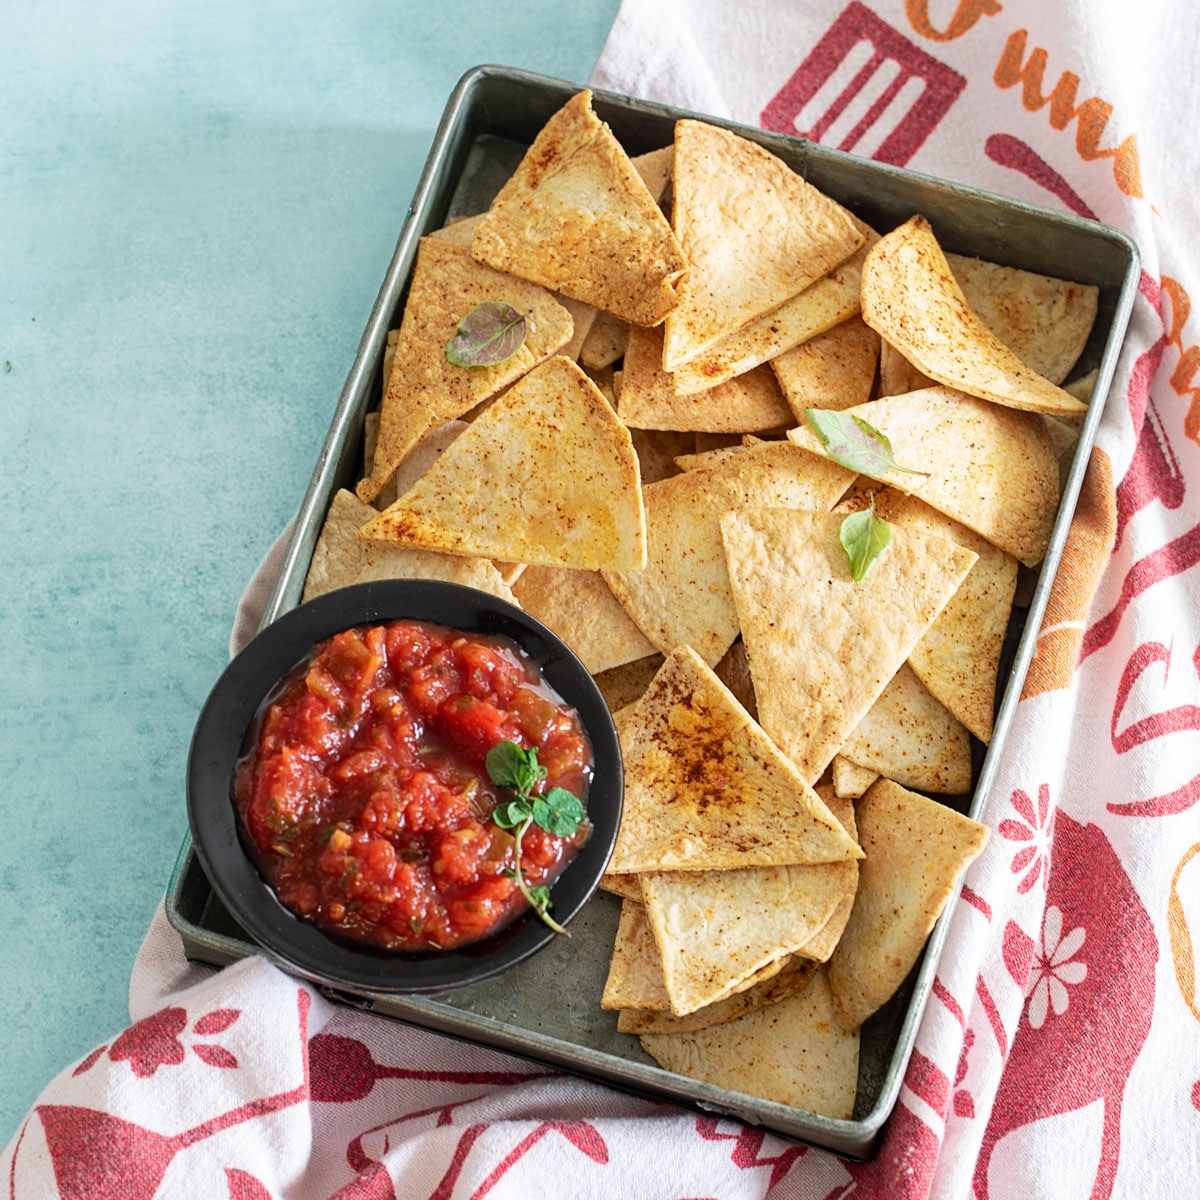 top view of a grey pan filled with air fryer tortilla chips and a salsa plate placed on the inner left side of pan. Grey pan is on top of a colorful kitchen towel